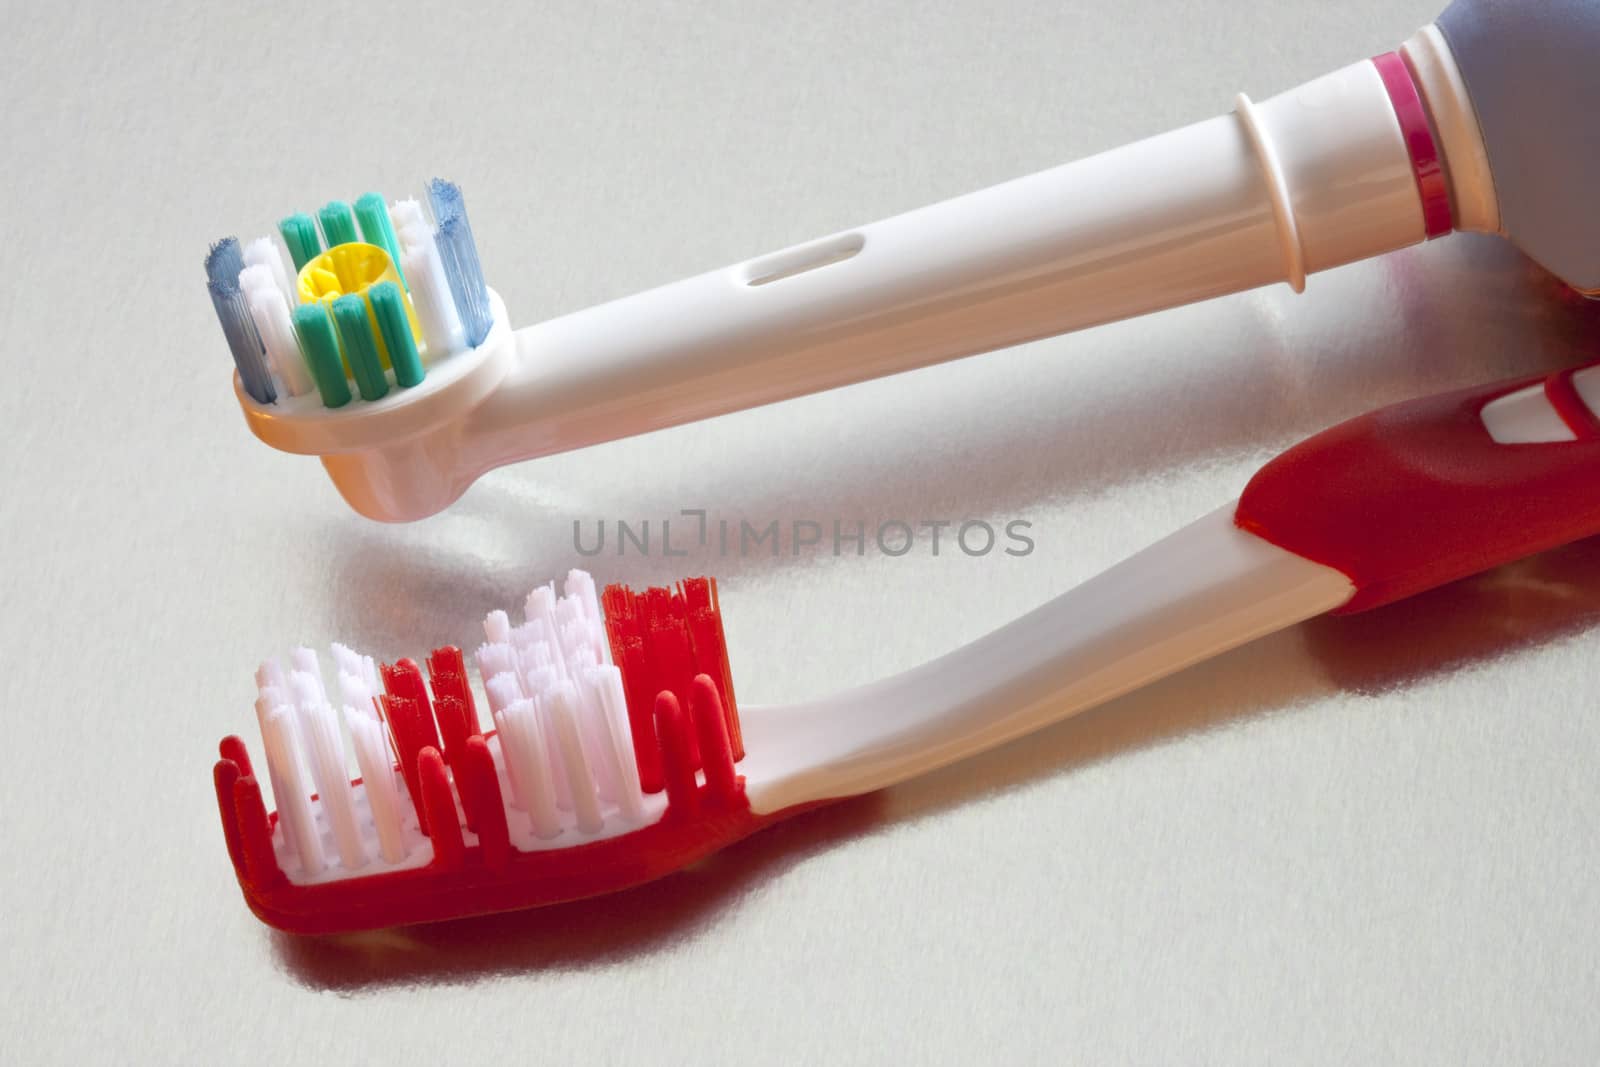 Oral Hygiene - Electric toothbrush and manual toothbrush.